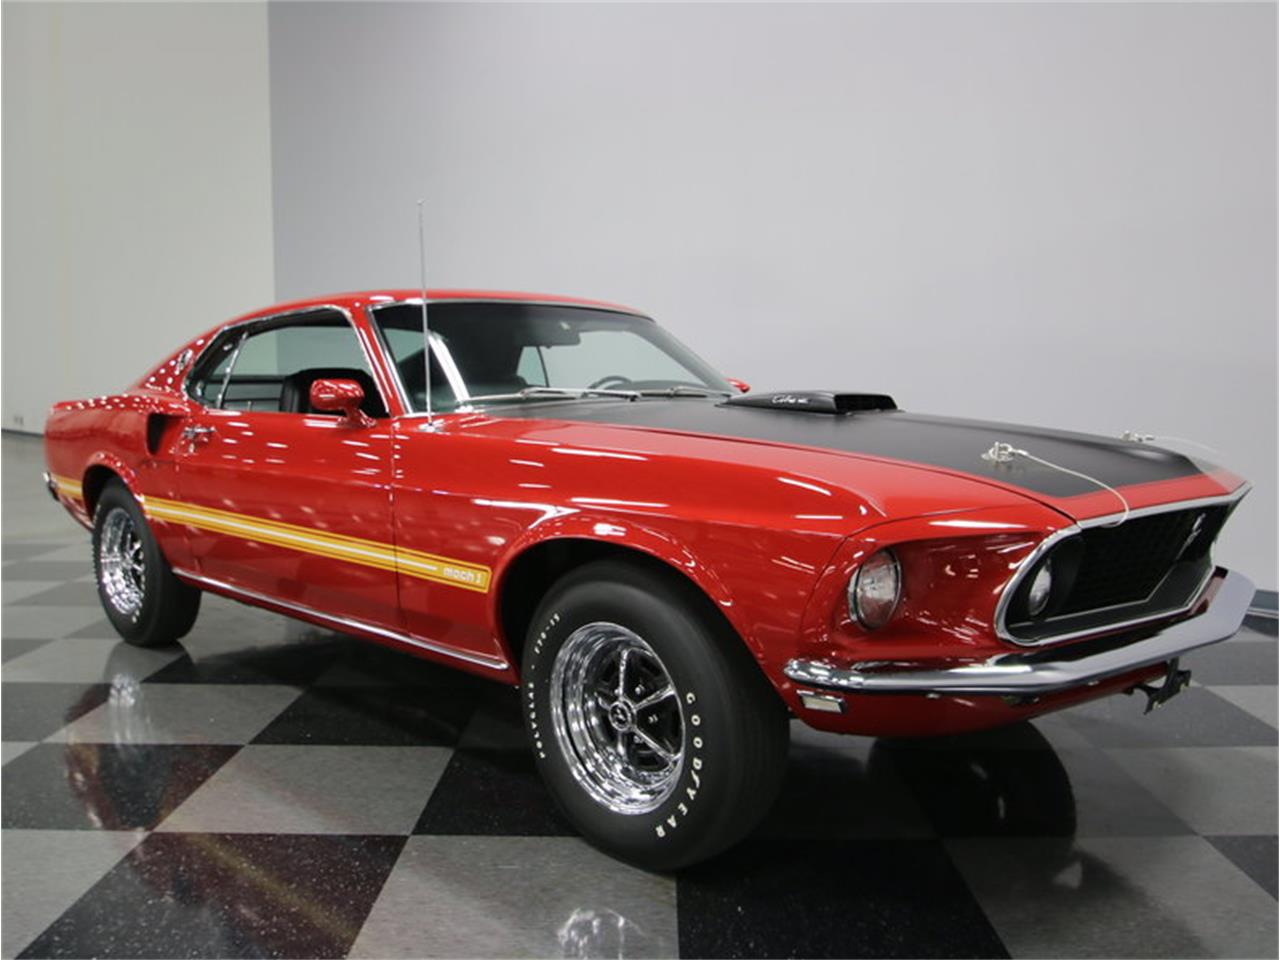 1969 Ford Mustang Mach 1 Cobra Jet for Sale | ClassicCars.com | CC-907789